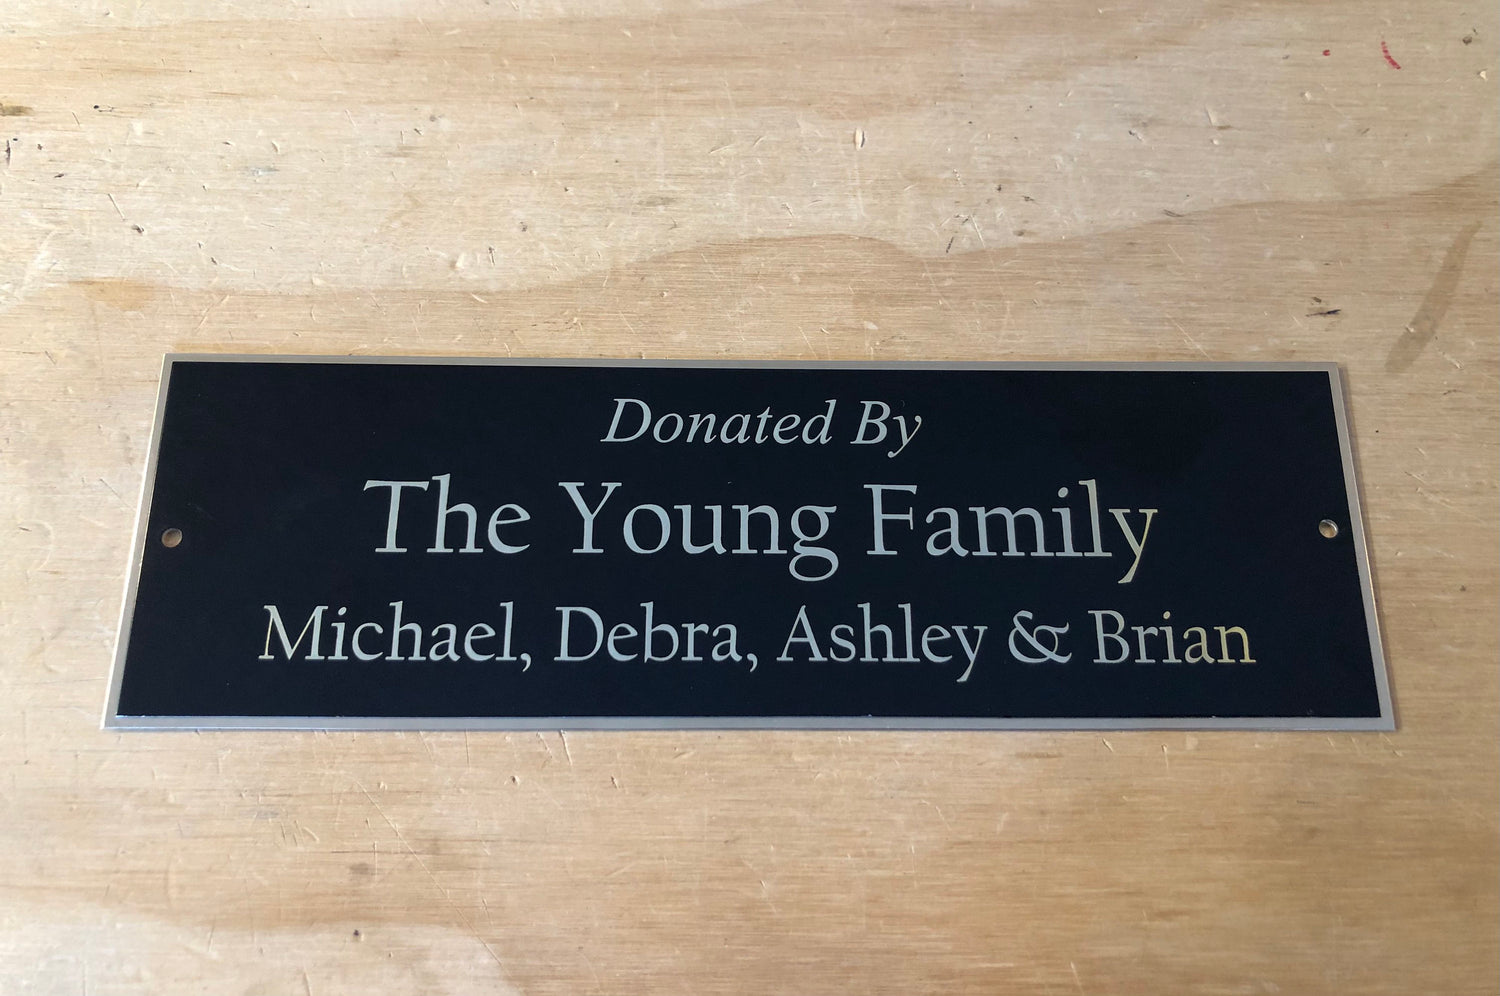 BRASS Bench Plate Custom Engraved Memorial In Loving Memory Of Plaque Name Plate for Cremation Urn or Engraved Plate Name Plaque